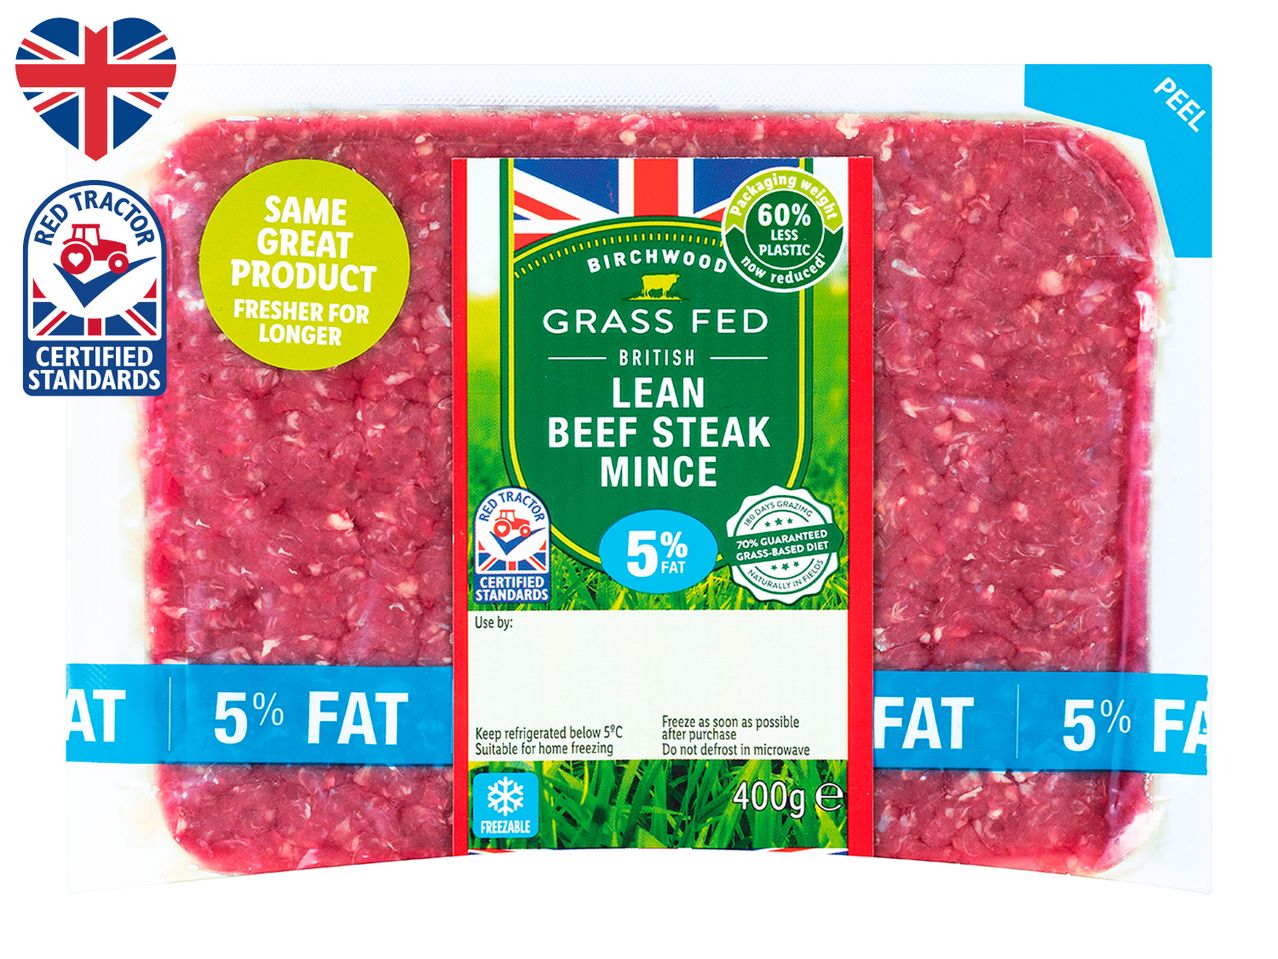 Go to full screen view: Birchwood Grass Fed British Lean Beef Steak Mince 5% Fat - Image 1